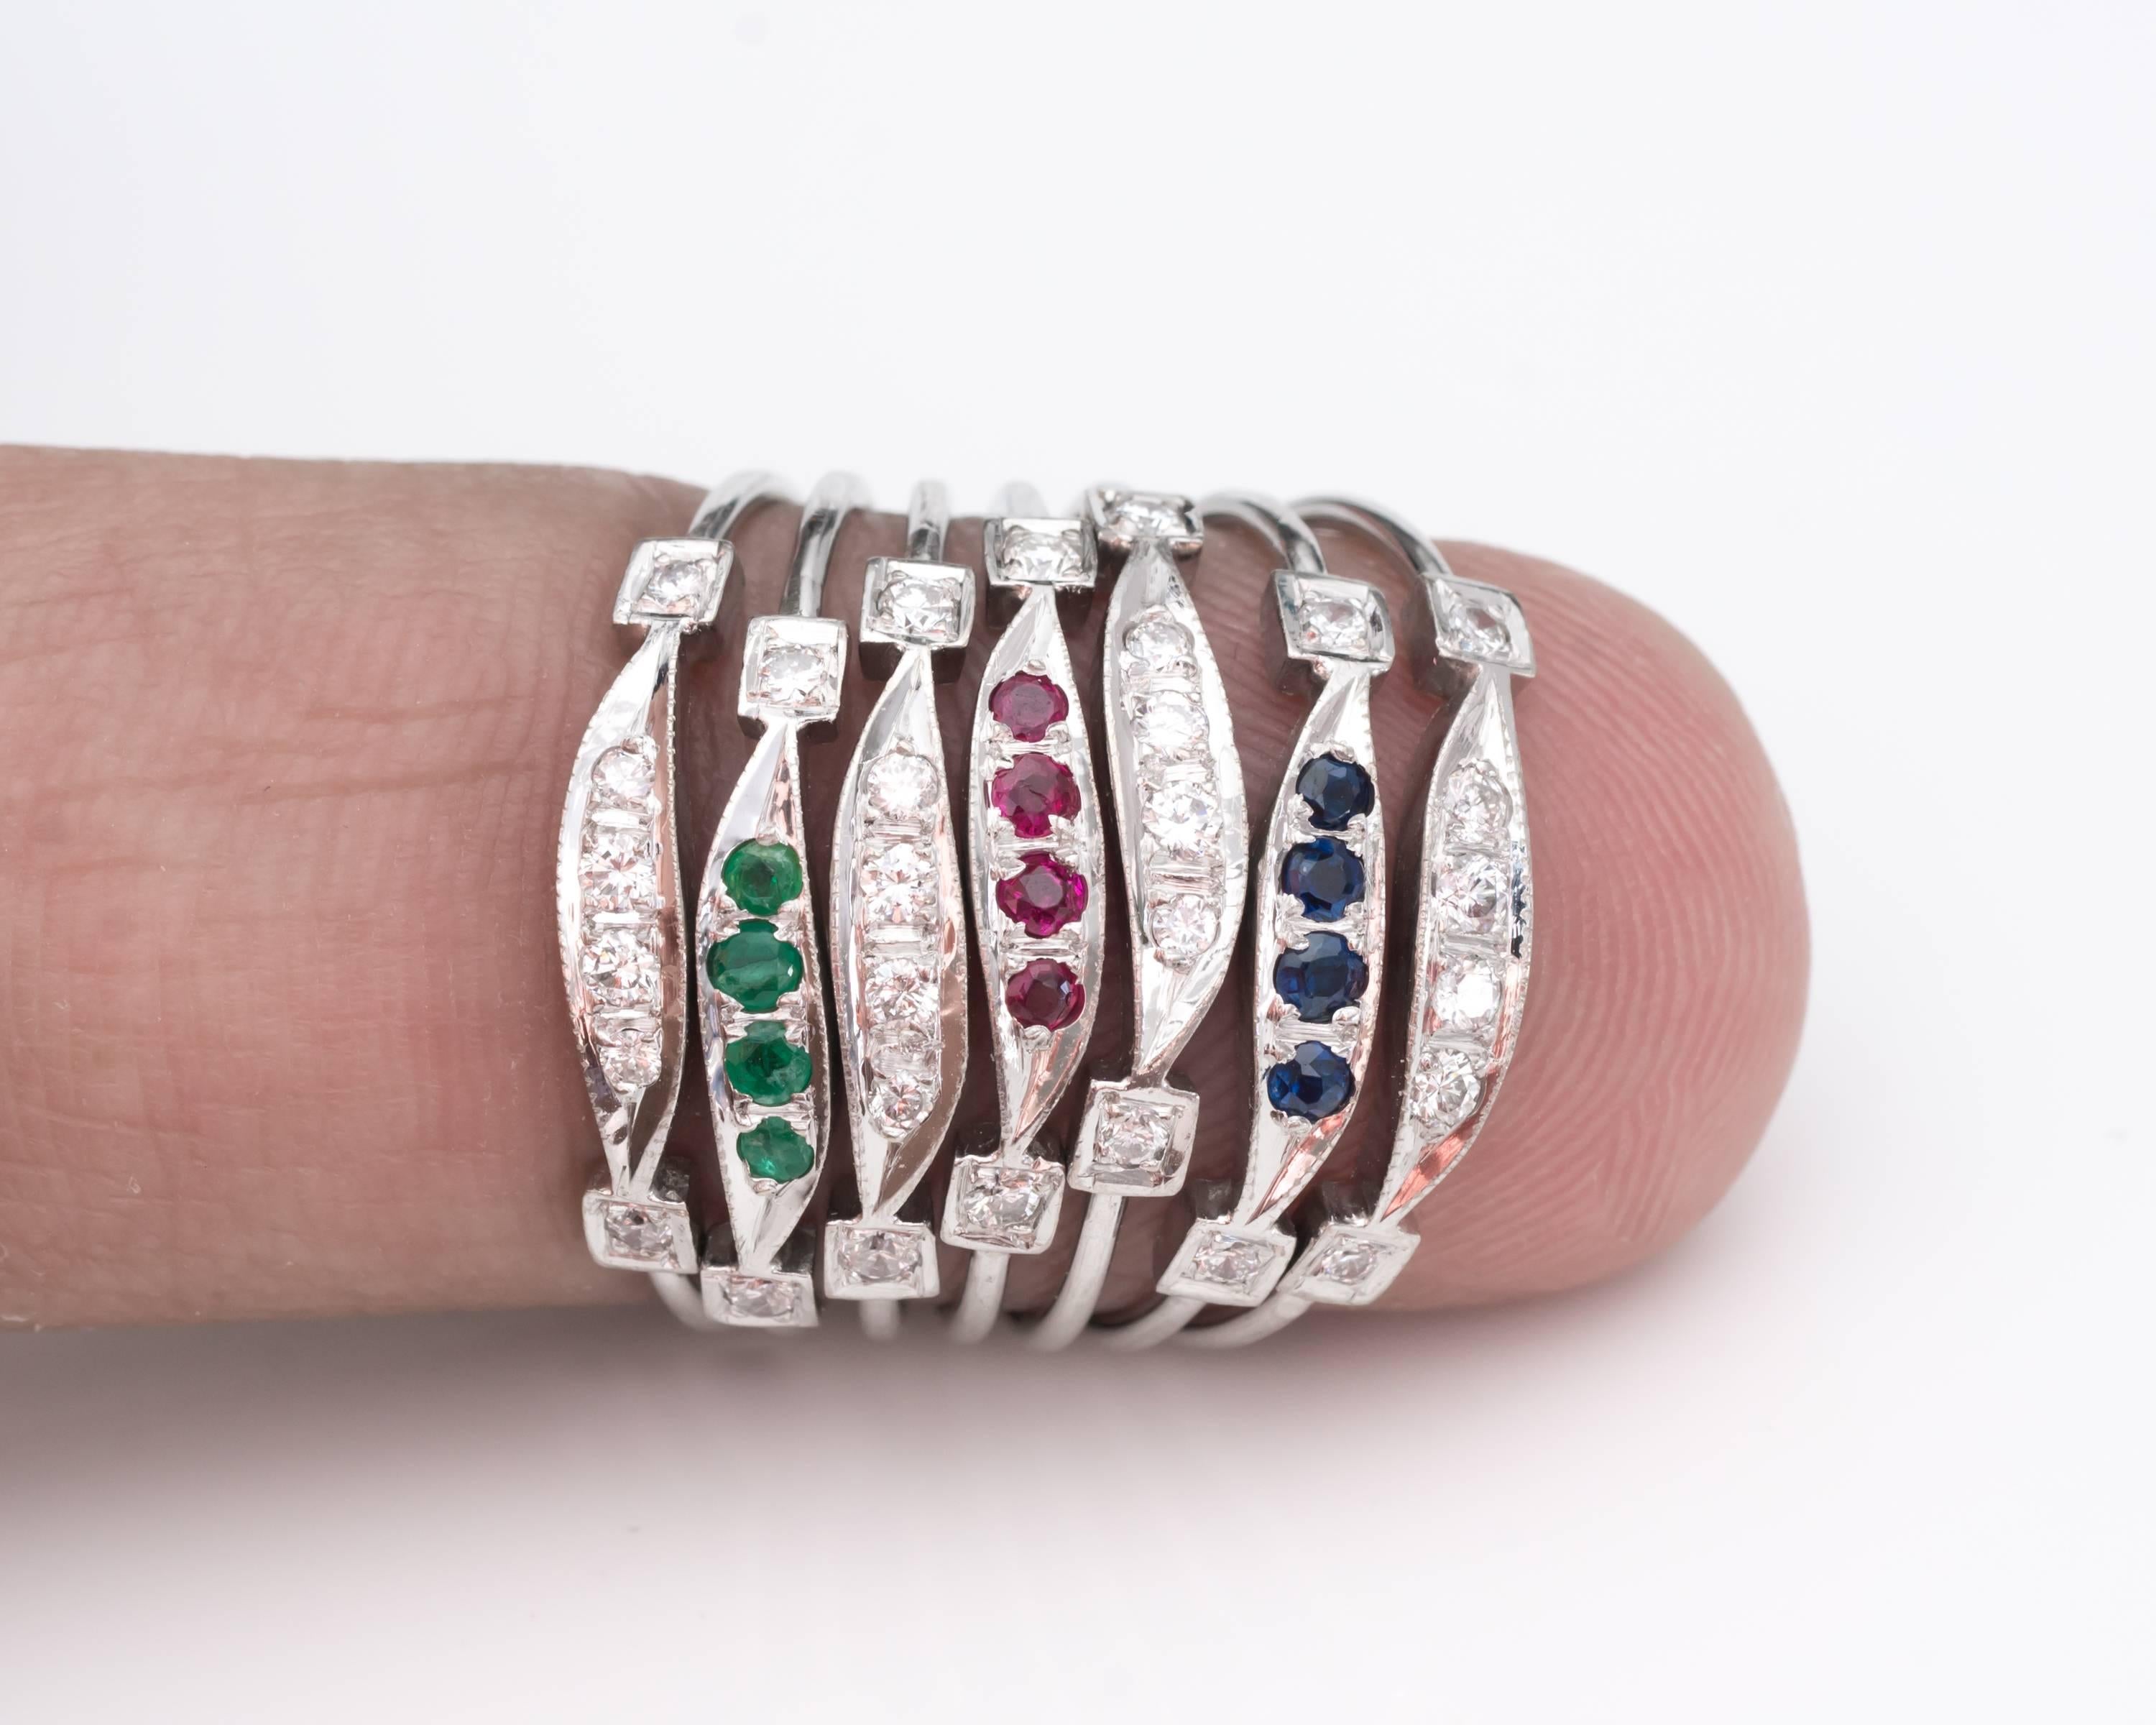 Round Cut Seven-Ring Stack with Emerald, Ruby, Sapphire, Diamond and 14 Karat White Gold